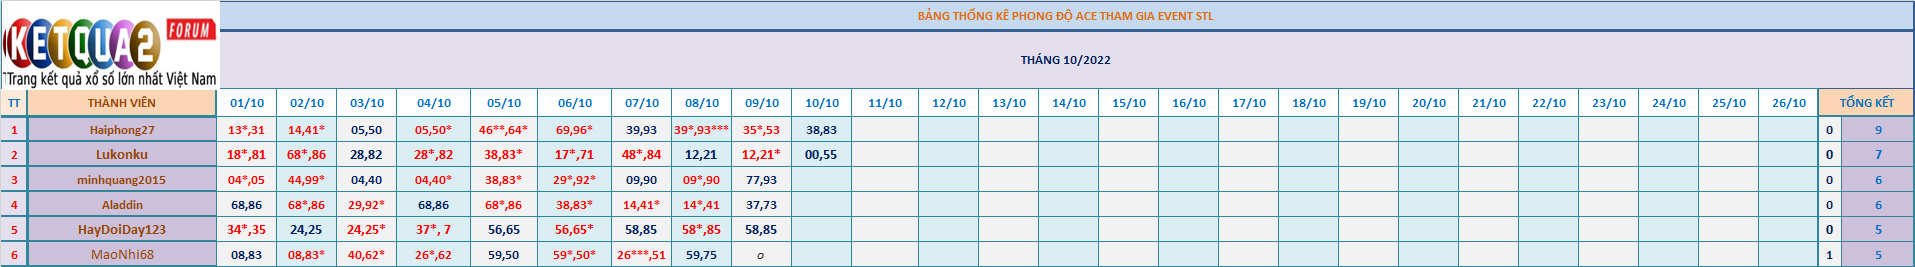 event thao luan.png